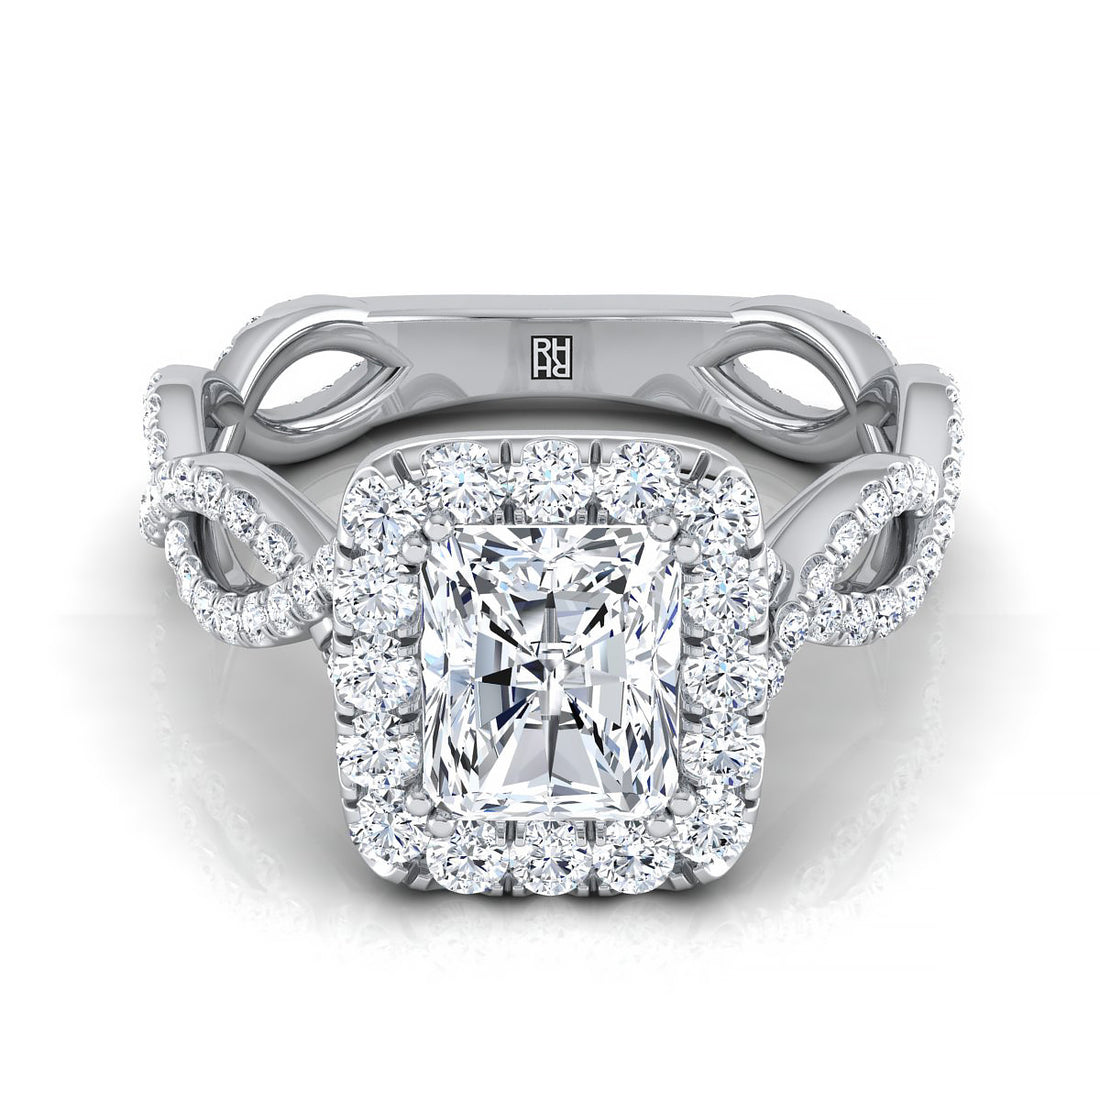 The Key Differences between a Radiant and Solitaire Cushion Cut Diamond Ring